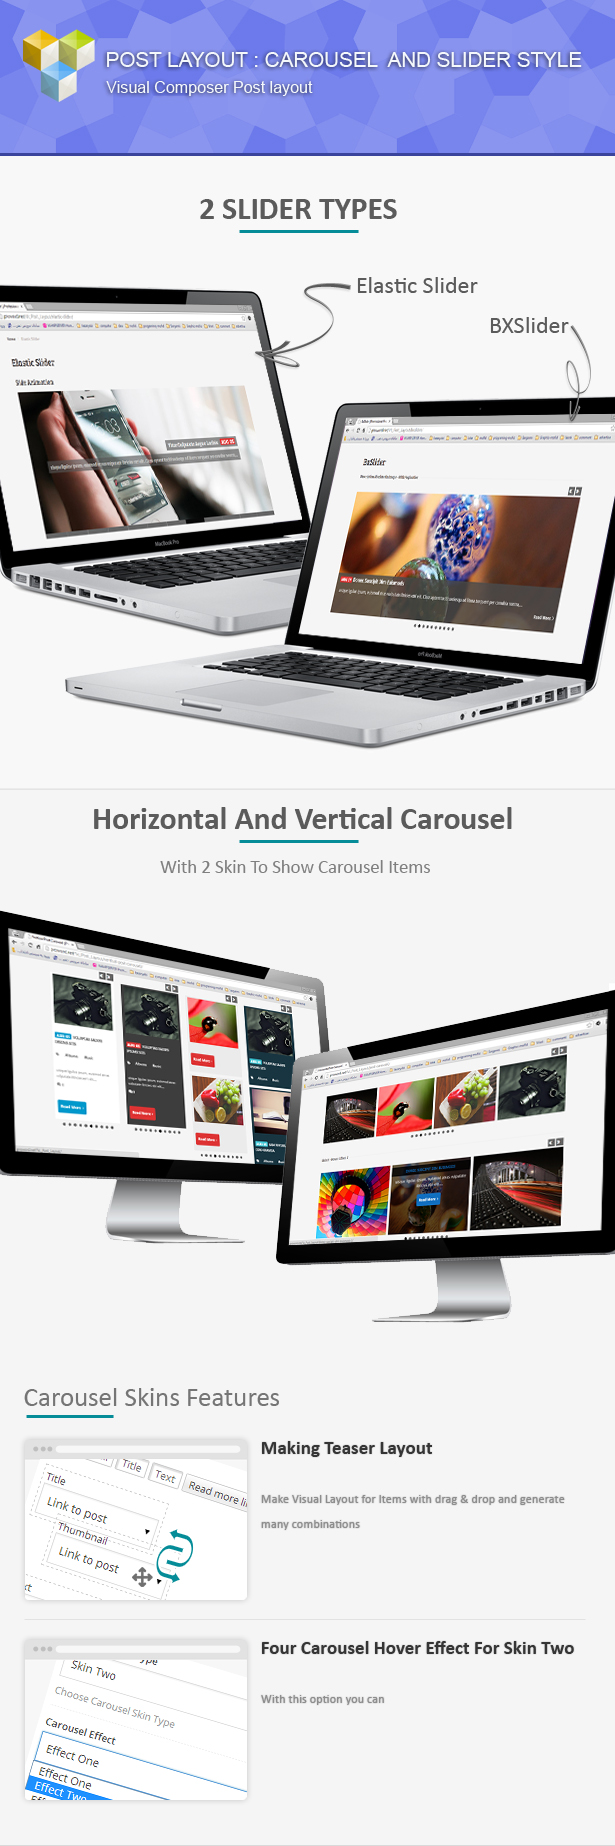 Post Layout: Carousel + Slider for Visual Composer - 2